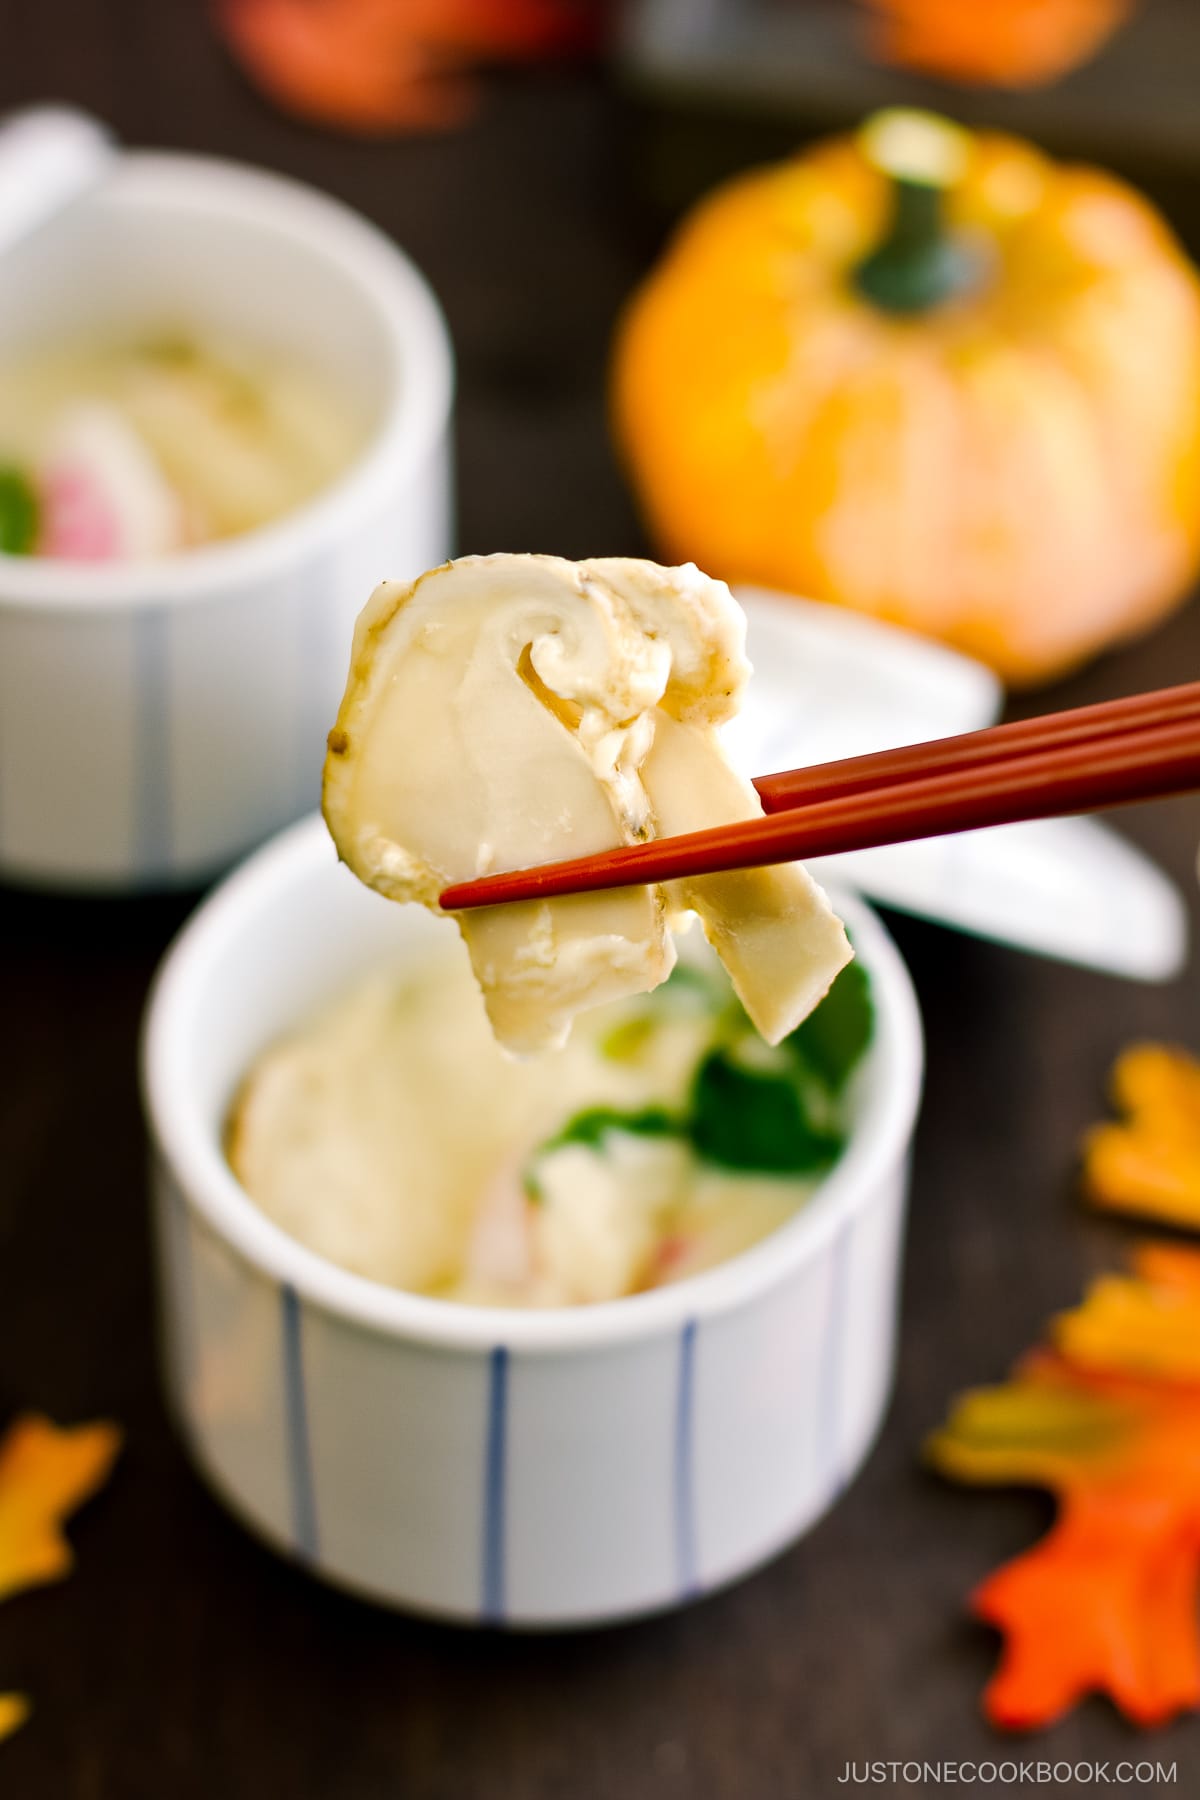 Chawanmushi cups containing matsutake mushrooms, shrimp, and fish cake slices in a savory steamed egg mixture.